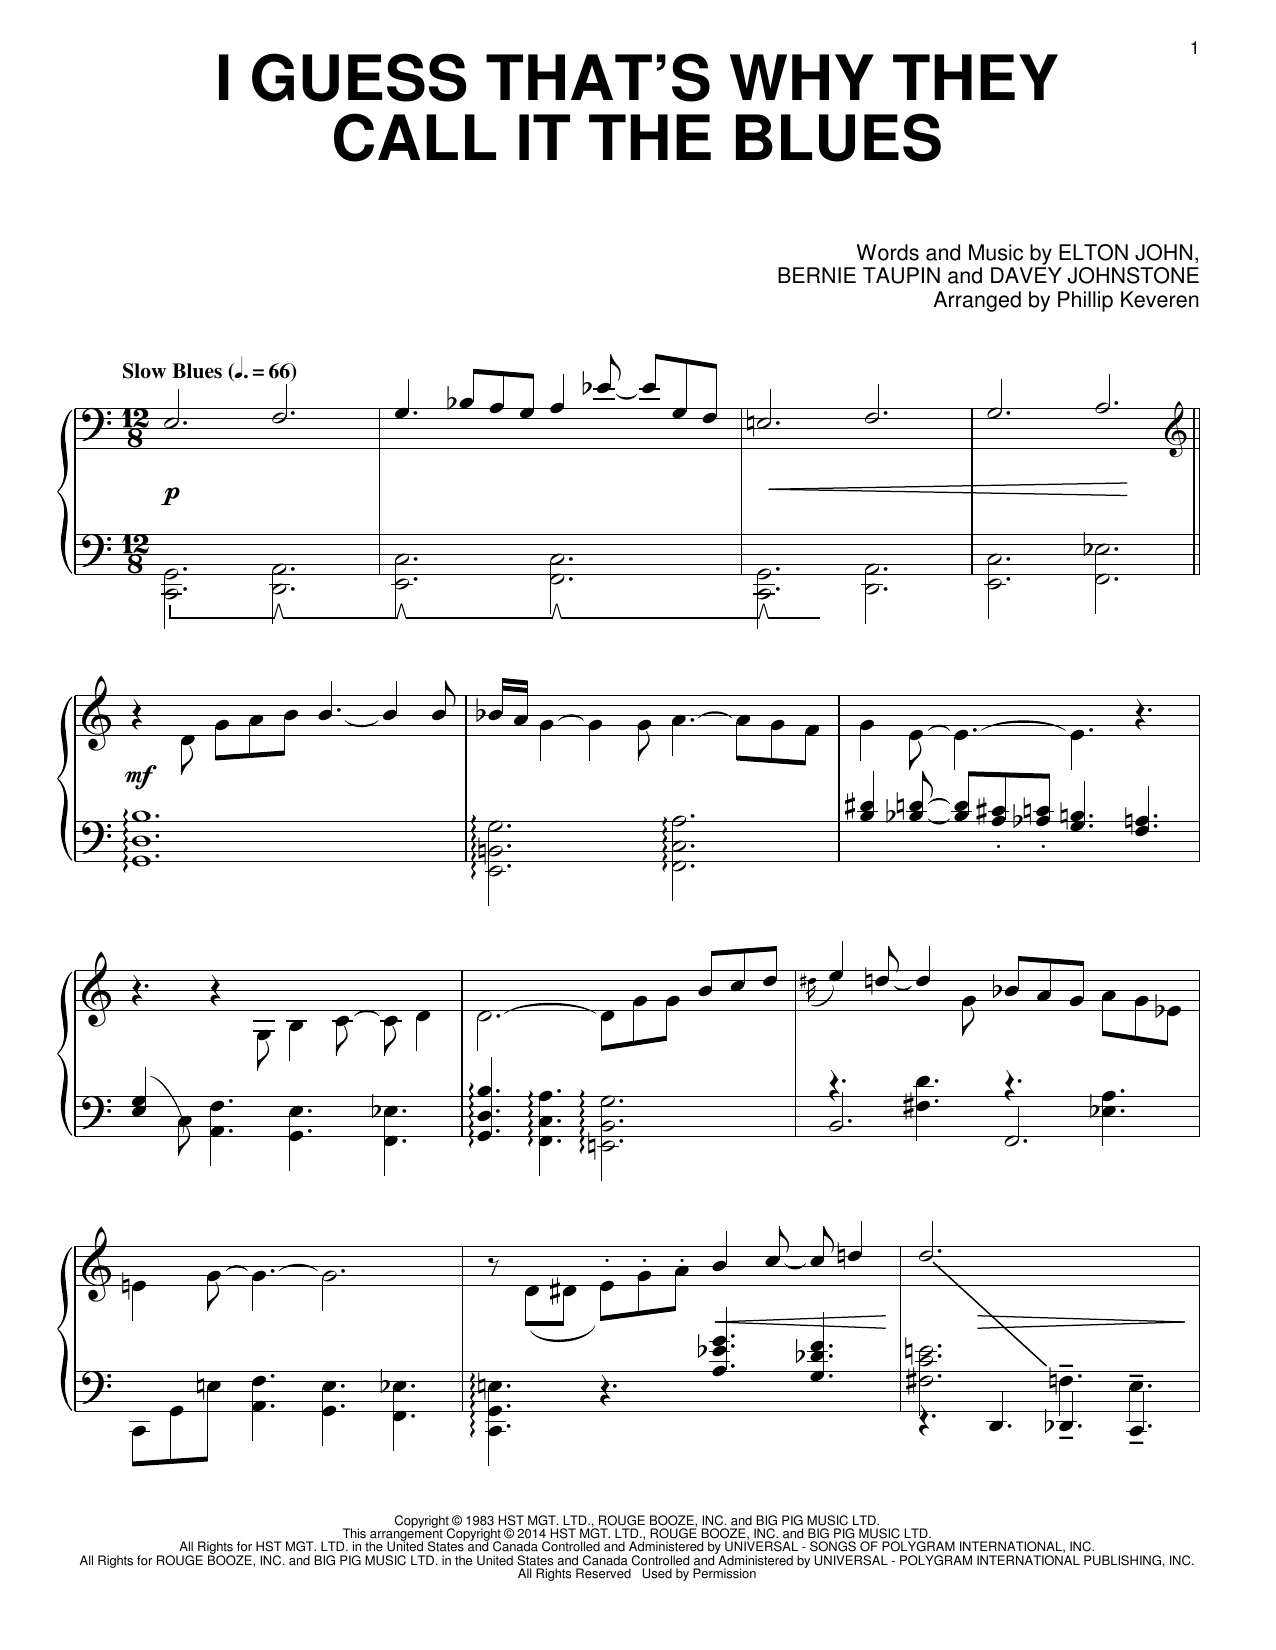 Download Elton John I Guess That's Why They Call It The Blu Sheet Music